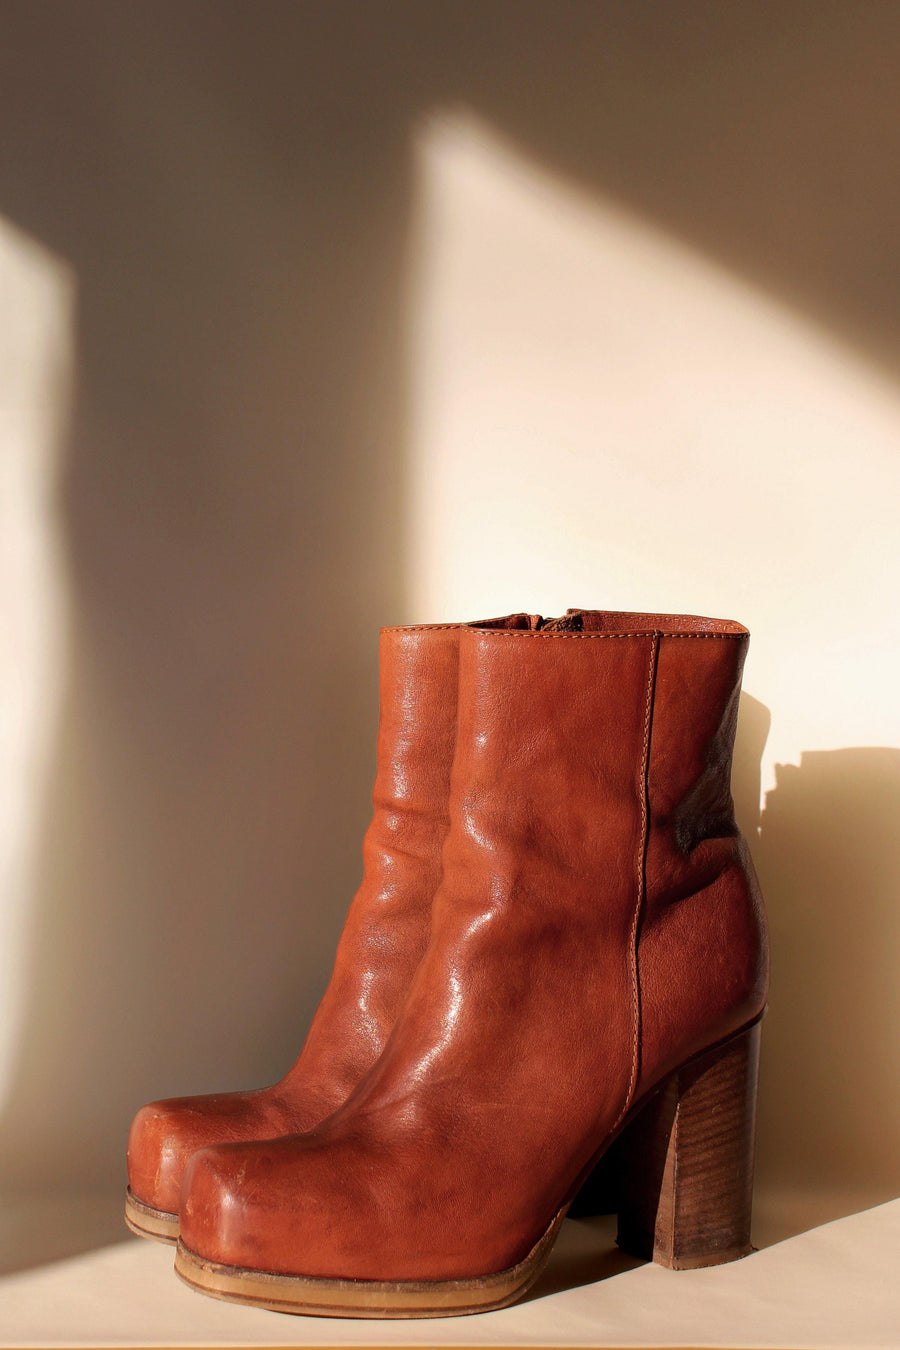 ACNE STUDIOS Rider Boots - The Good Store Berlin